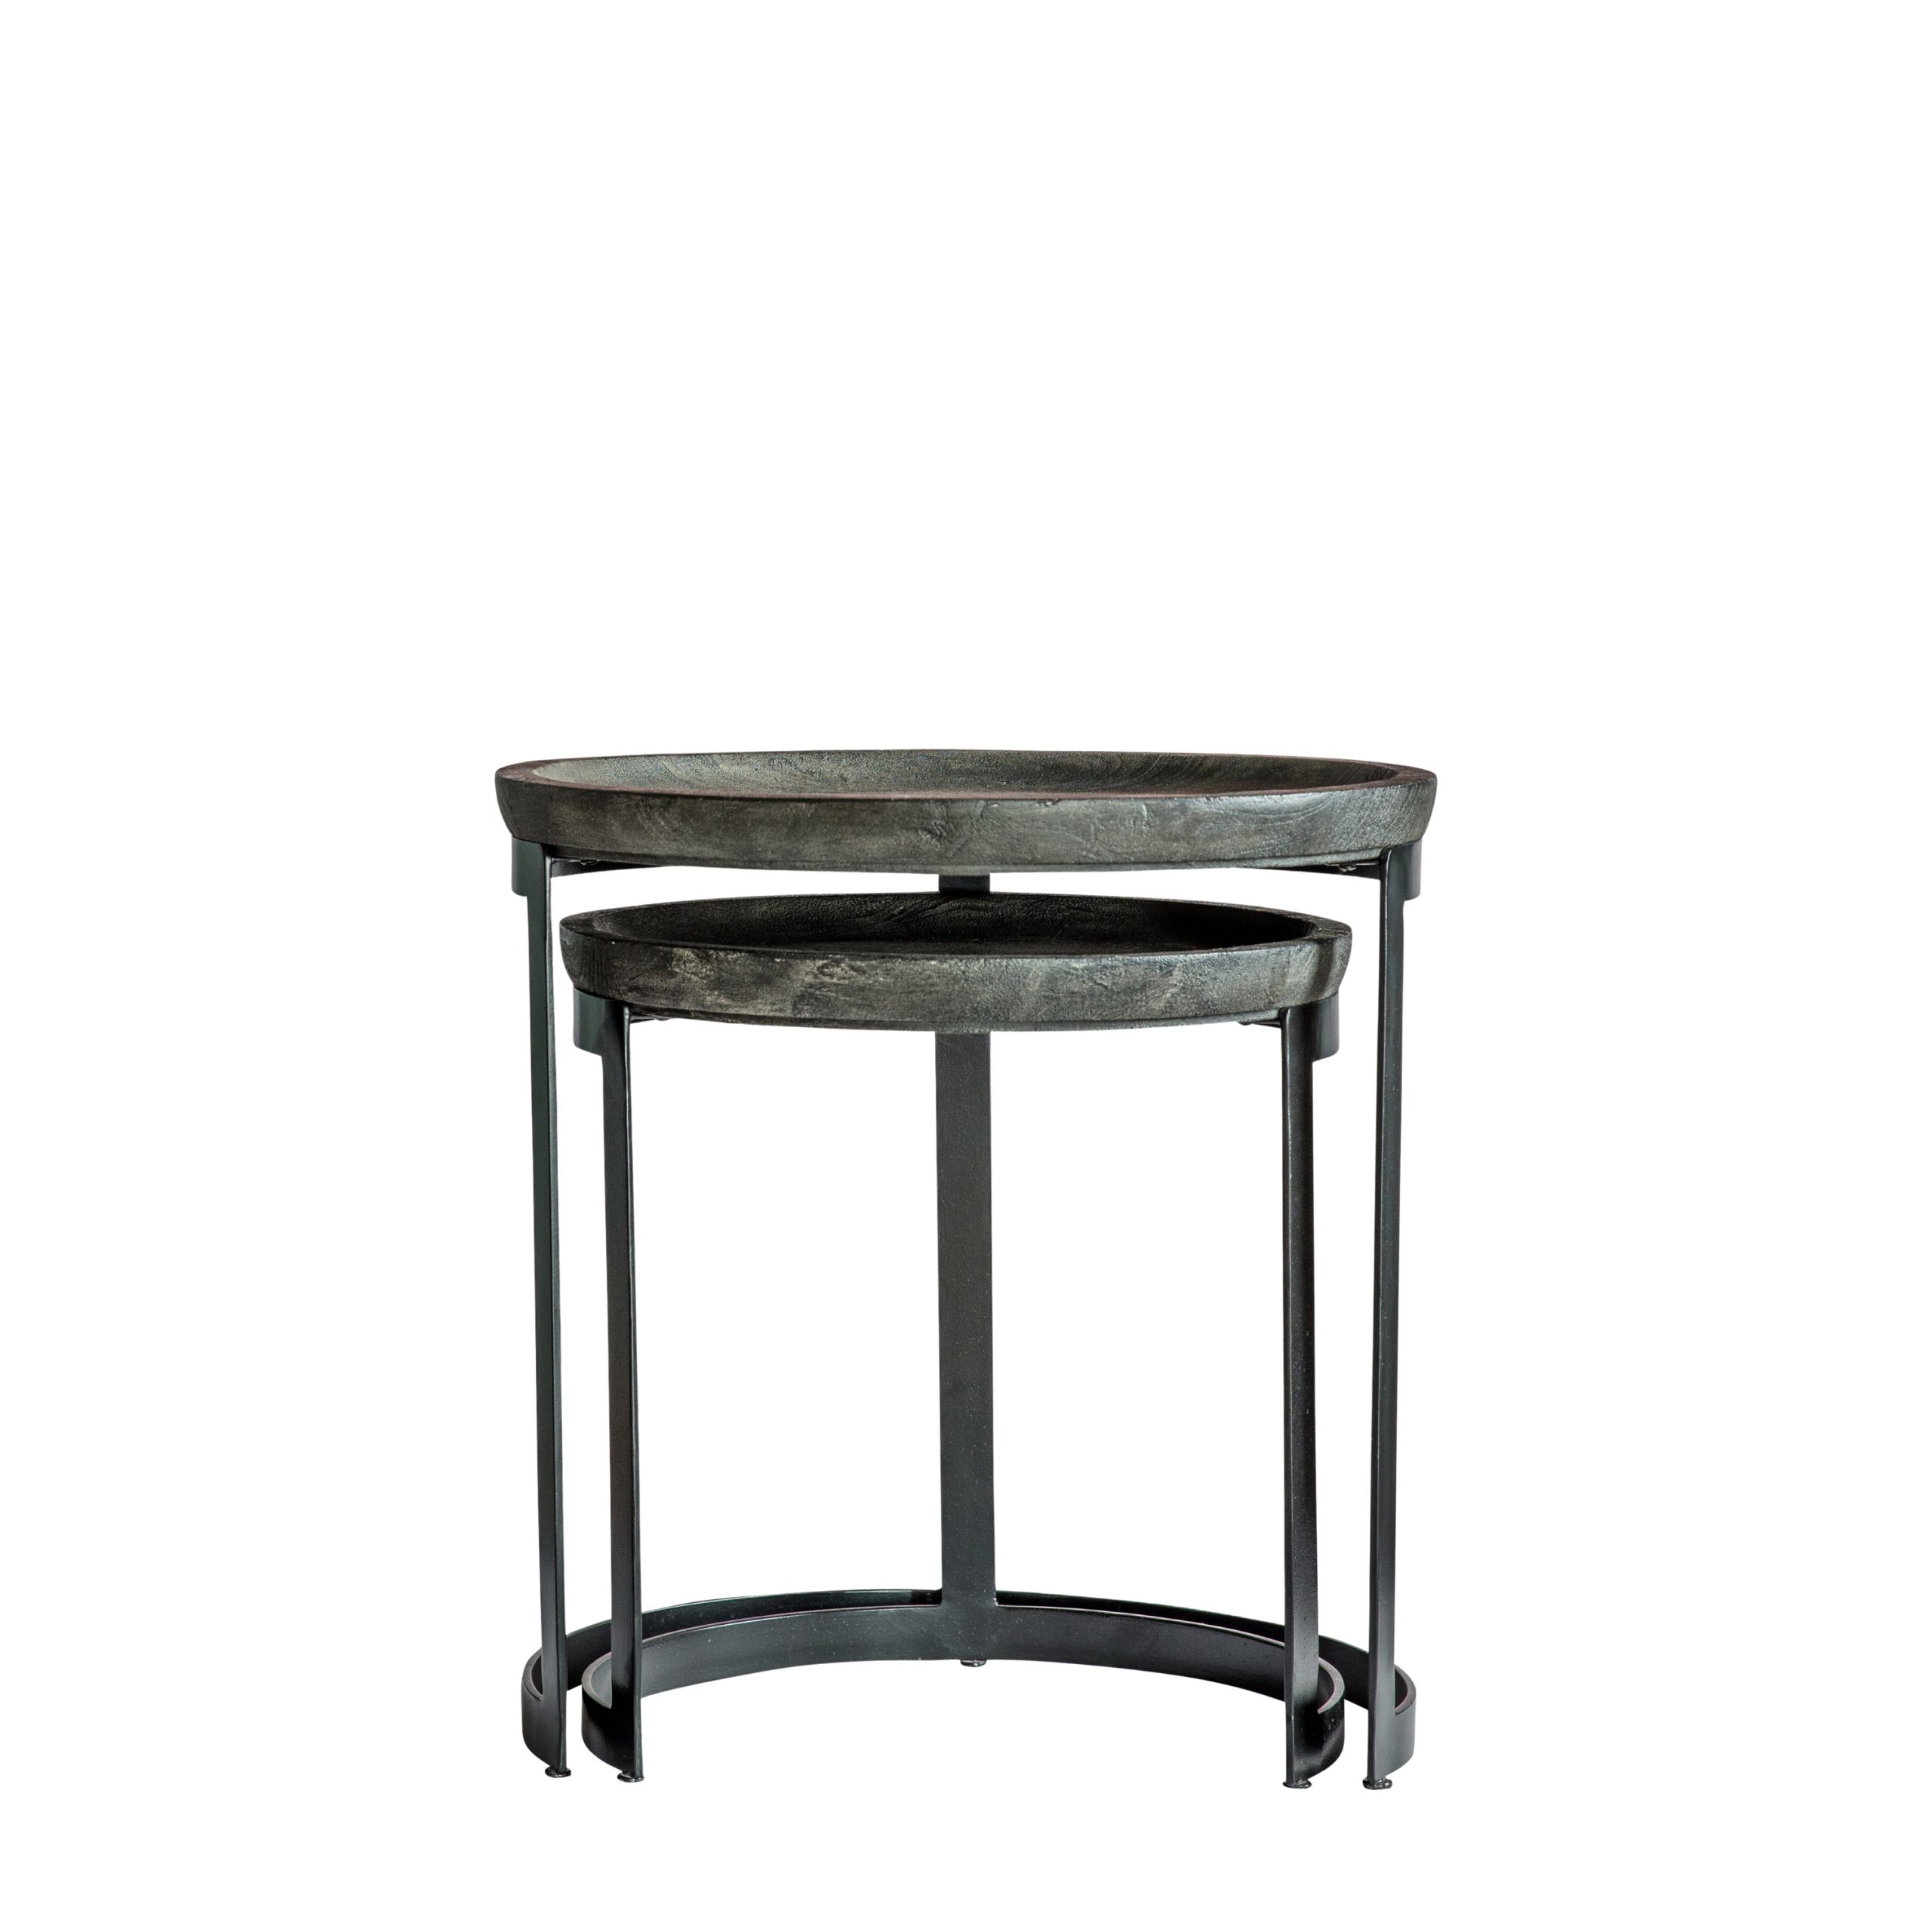 Gallery Direct Ottawa Nest of 2 Tables